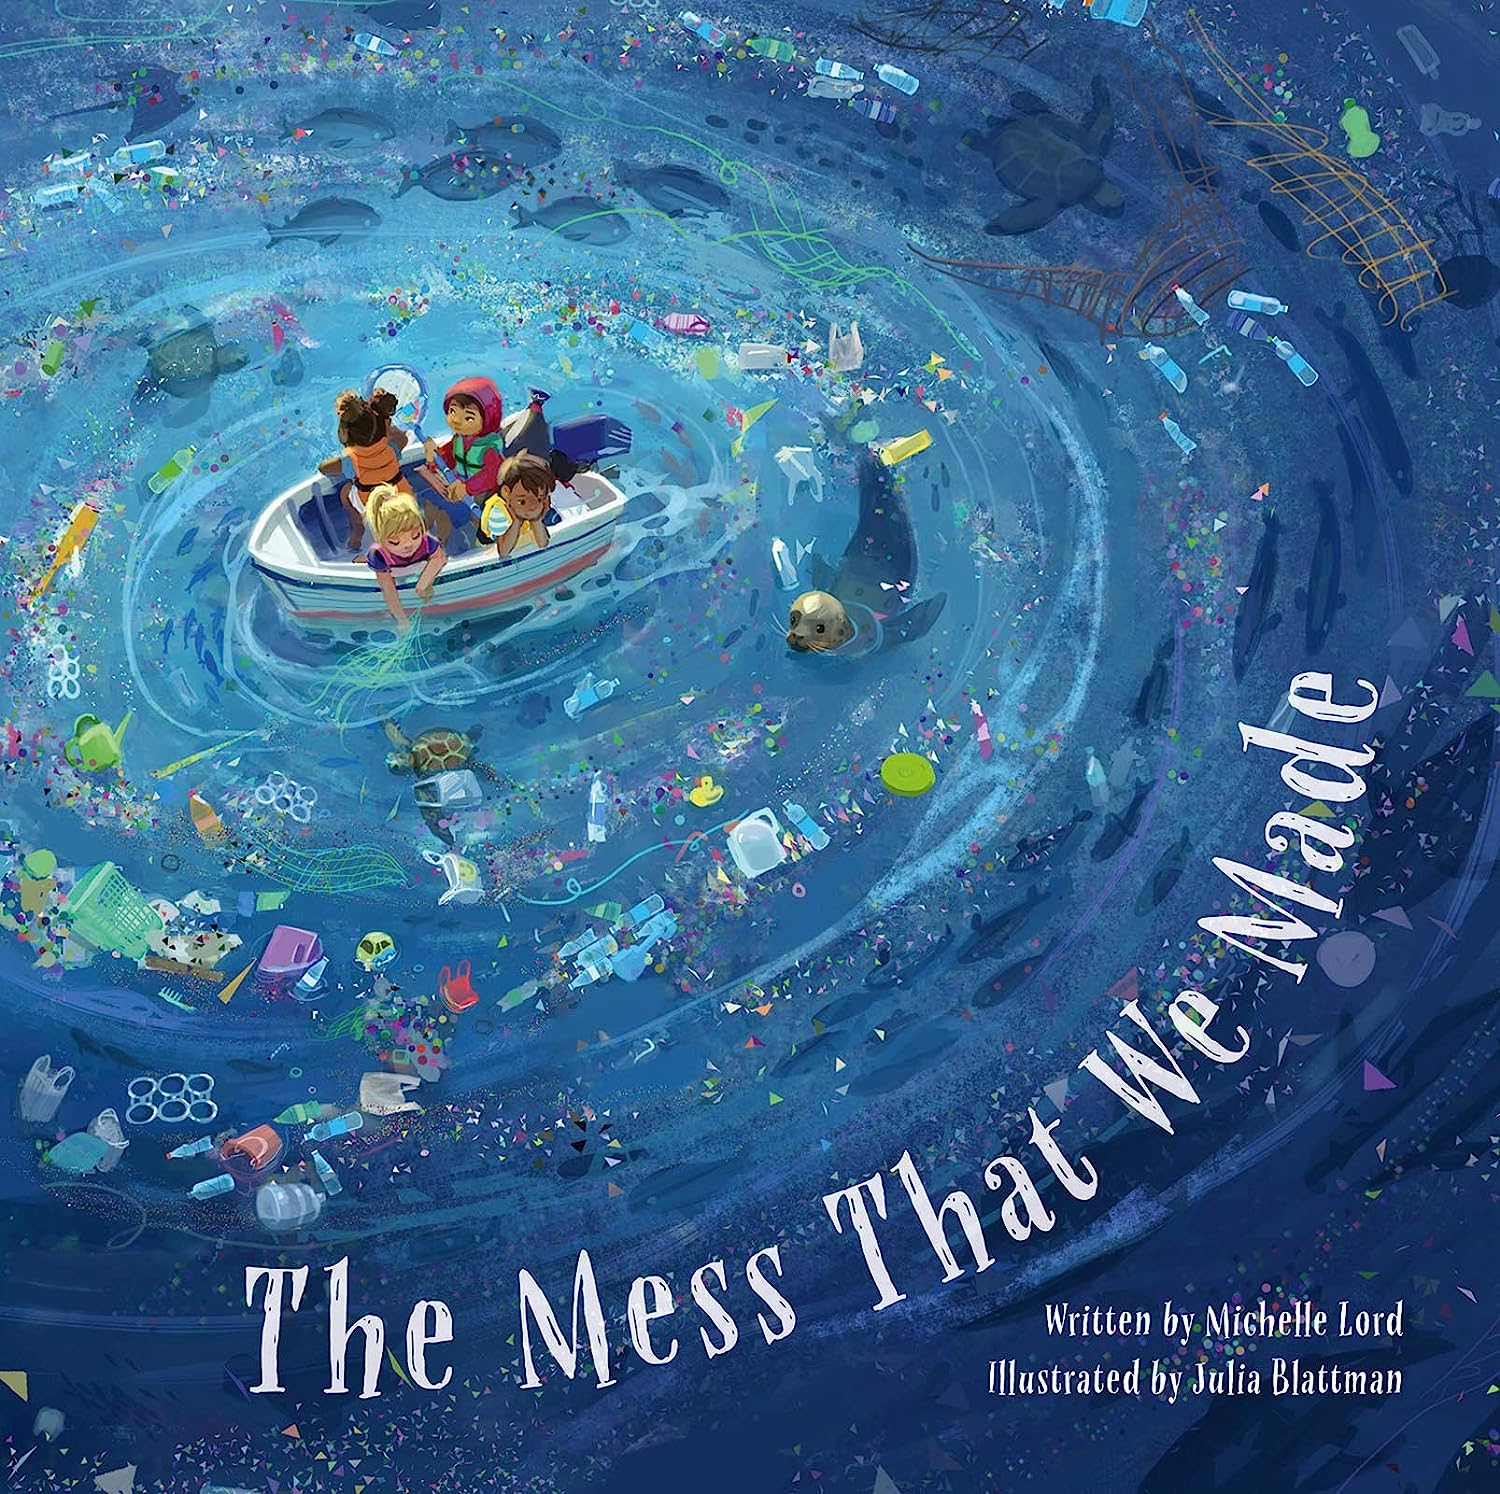 Book cover of The Mess that We Made by Michelle Lord. Four children using a boat to clan up trash in a marine filled ocean.